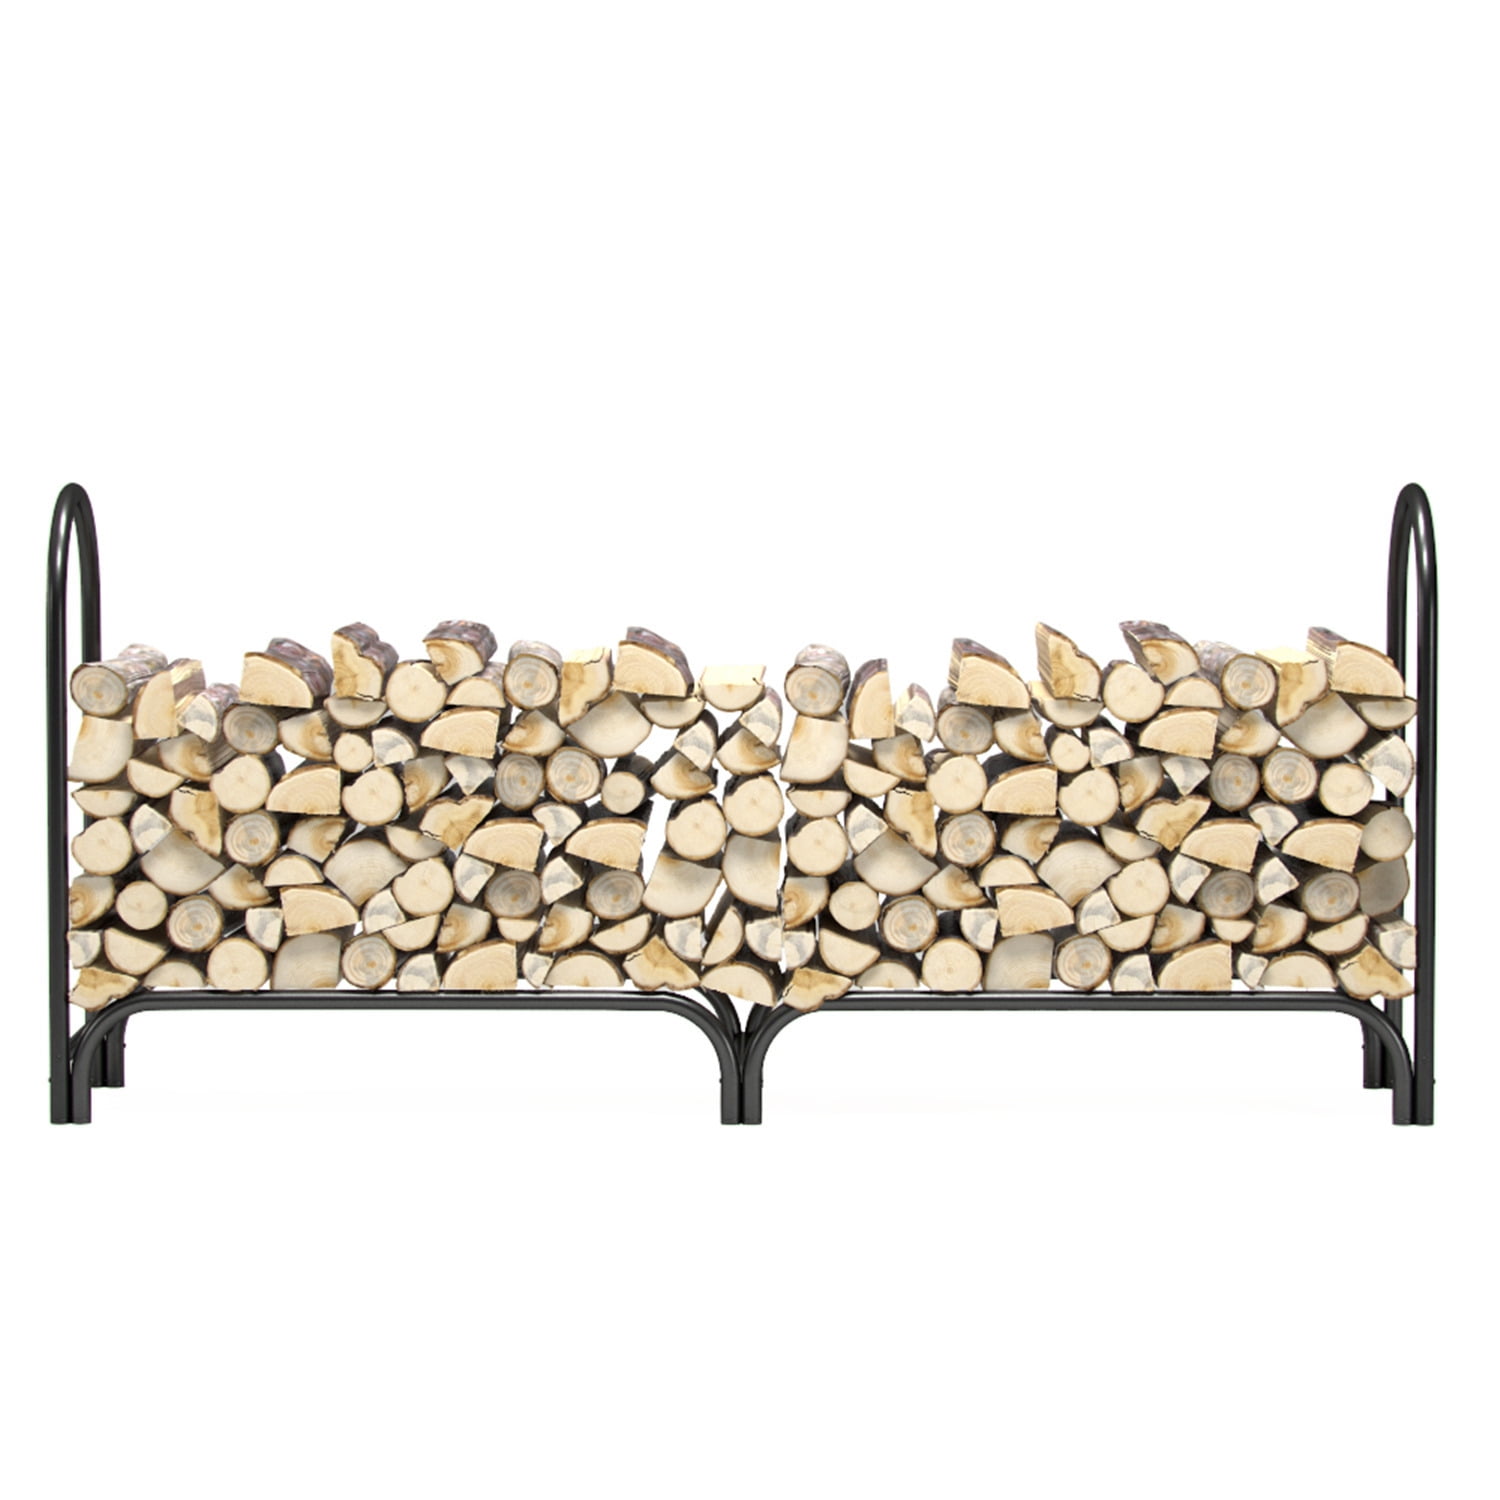 Regal Flame 8 ft Heavy Duty Firewood Shelter Log Rack for Fireplaces and Fire Pits to Enjoy a Real Fire or Complement Vent-Free